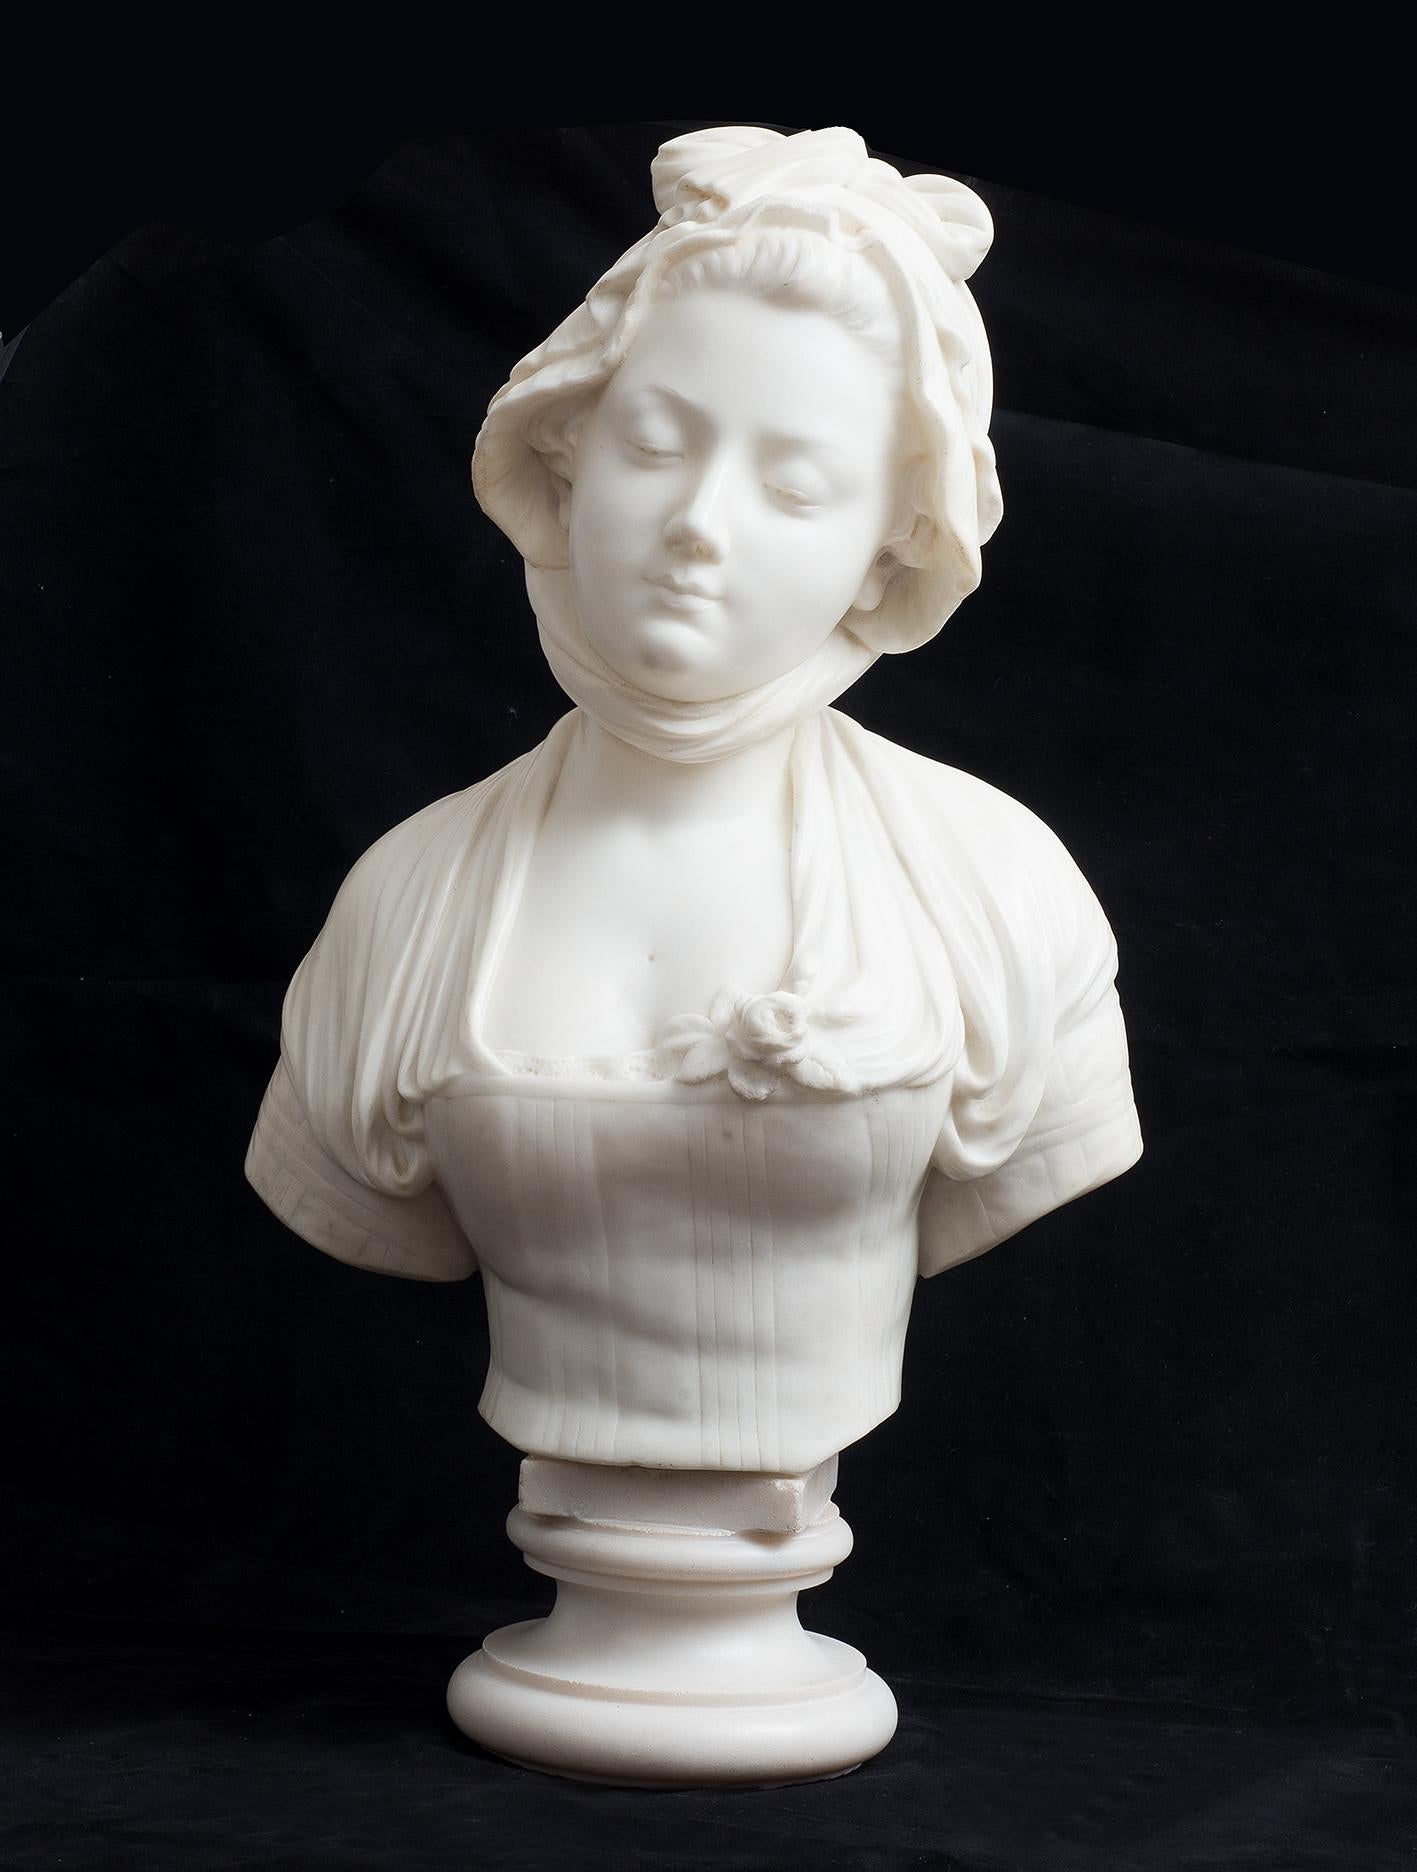 Unknown Figurative Sculpture - Antique white marble statuary sculpture depicting bust of noblewoman.